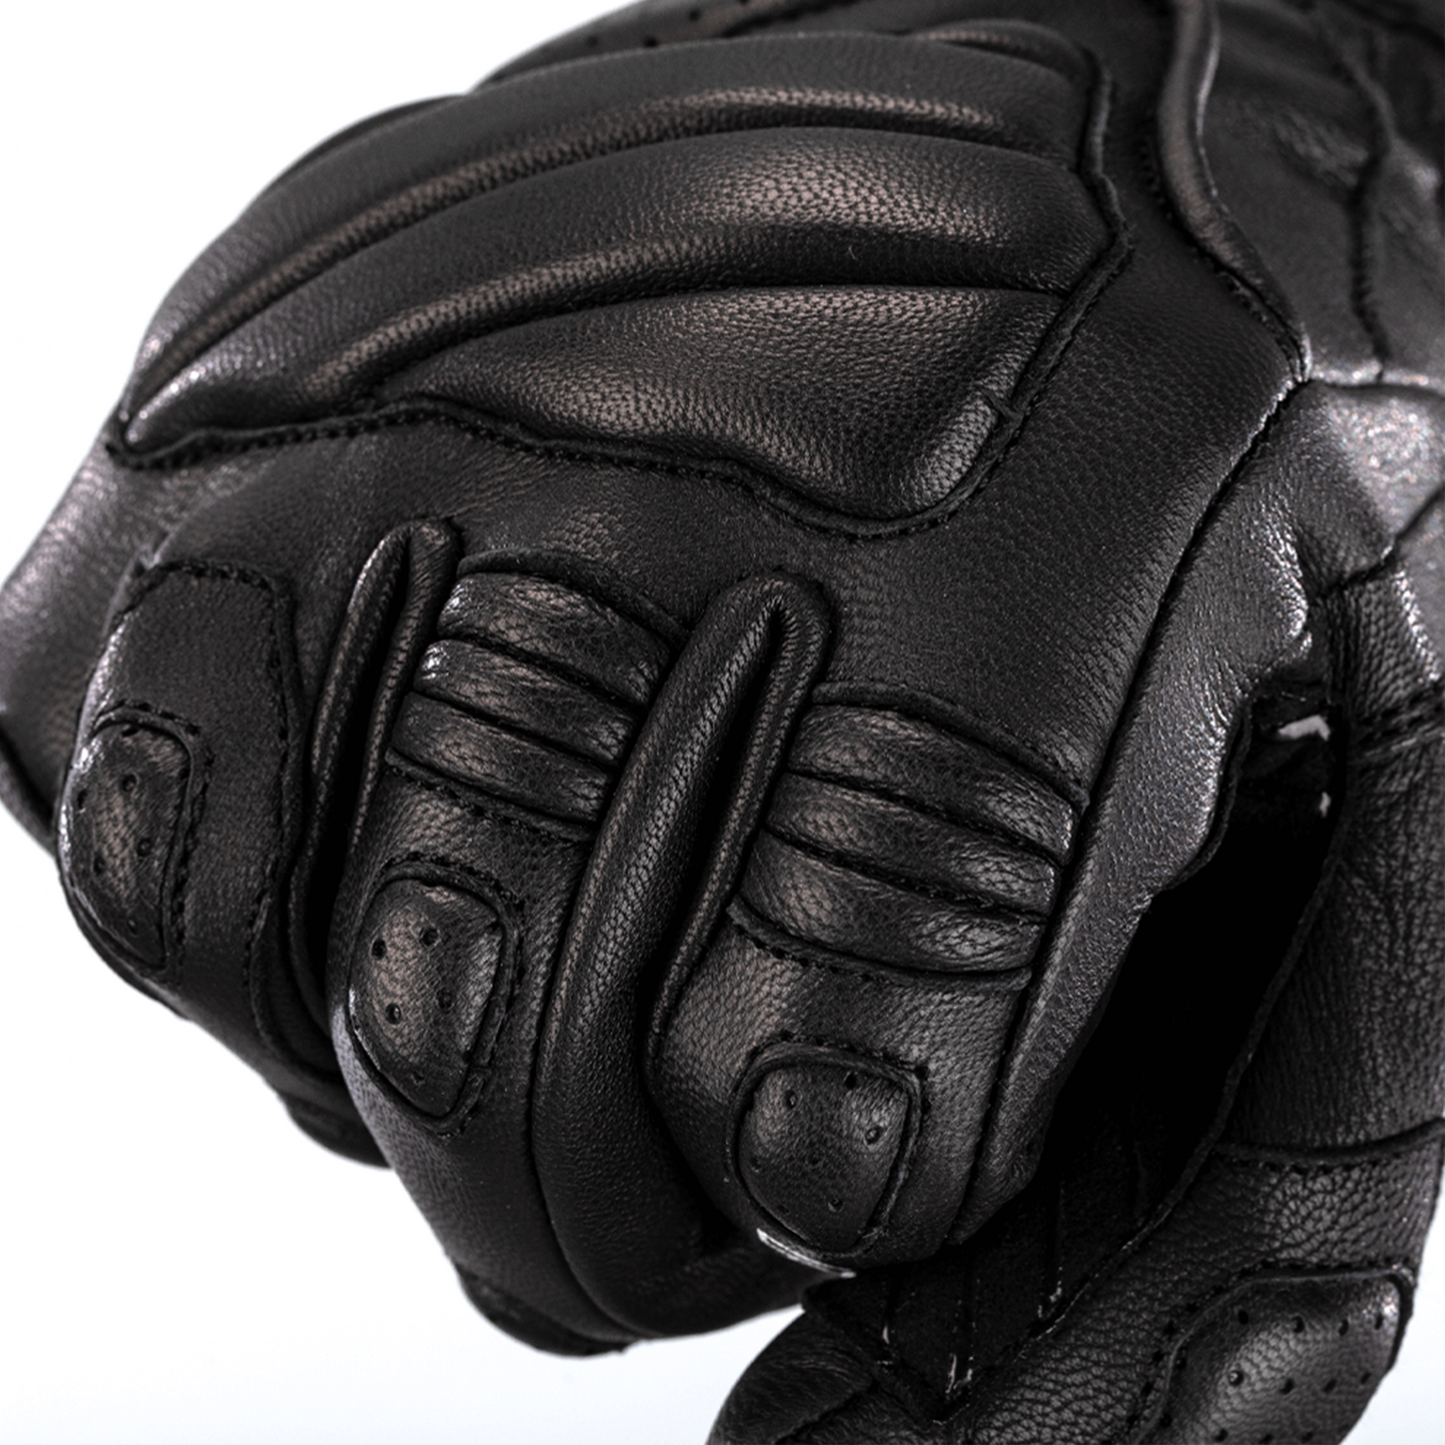 RST Turbine Leather Riding Gloves - CE APPROVED - Black